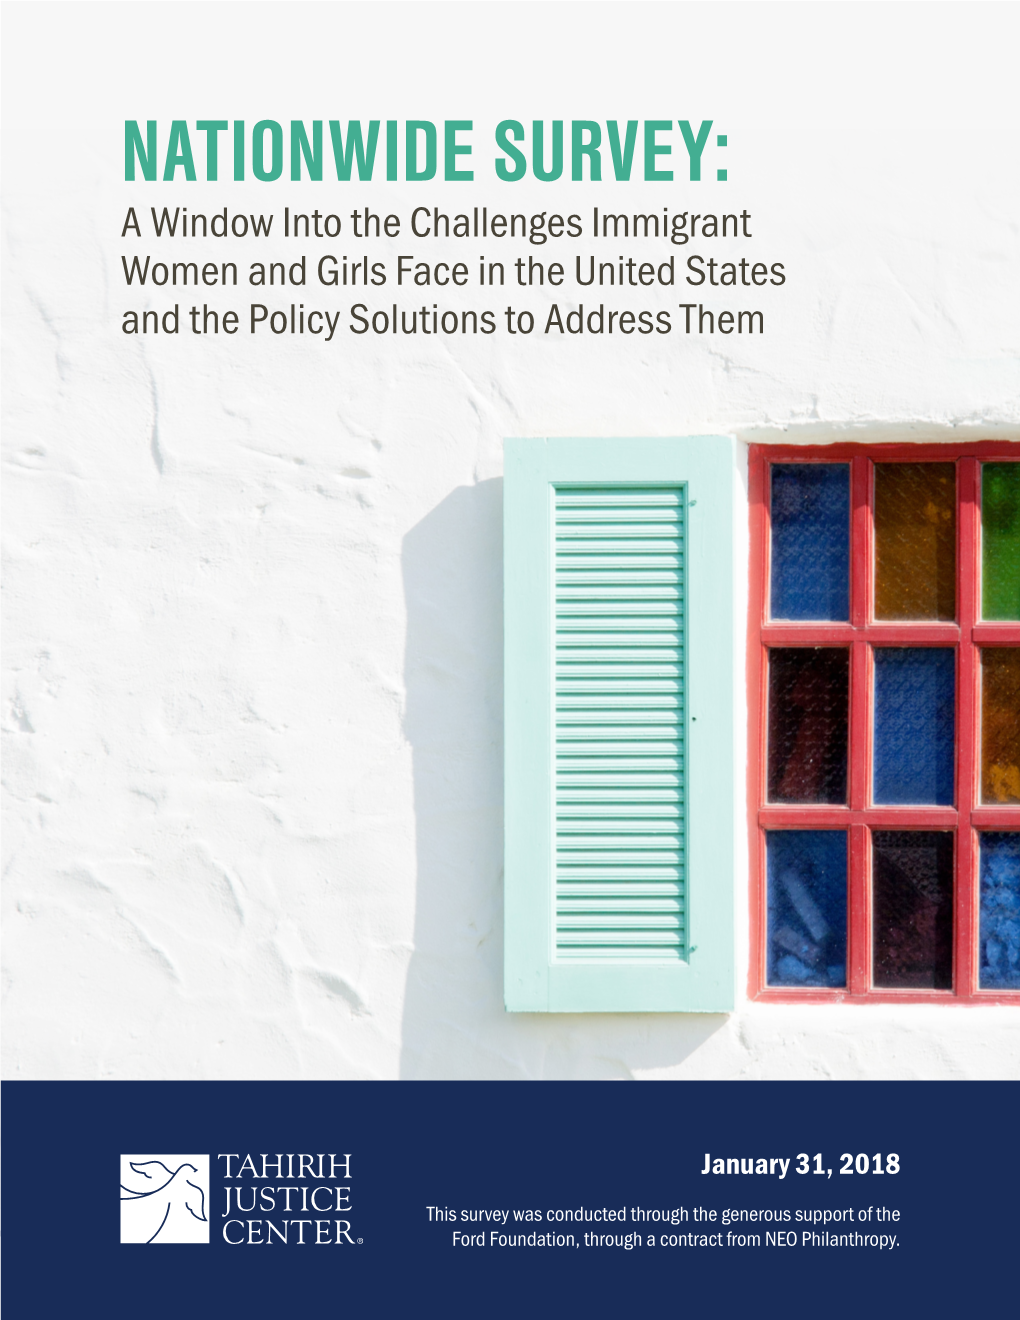 NATIONWIDE SURVEY: a Window Into the Challenges Immigrant Women and Girls Face in the United States and the Policy Solutions to Address Them